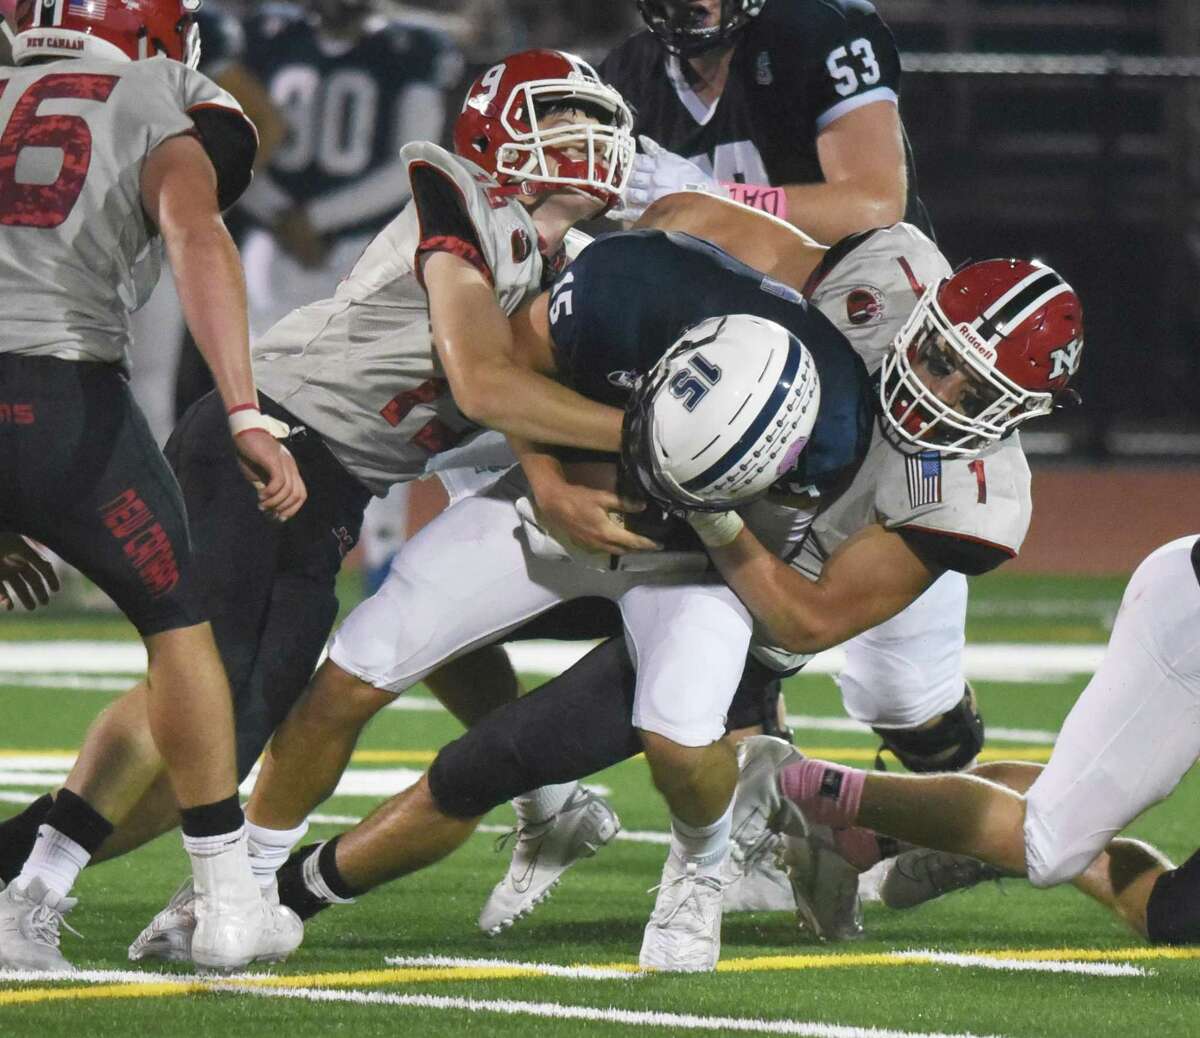 New Canaan's Chris Carratu (1) and Jack Hagan (19) tackle Staples' Jake Thaw (15) during a football game in Westport on Friday, Oct. 25, 2019.